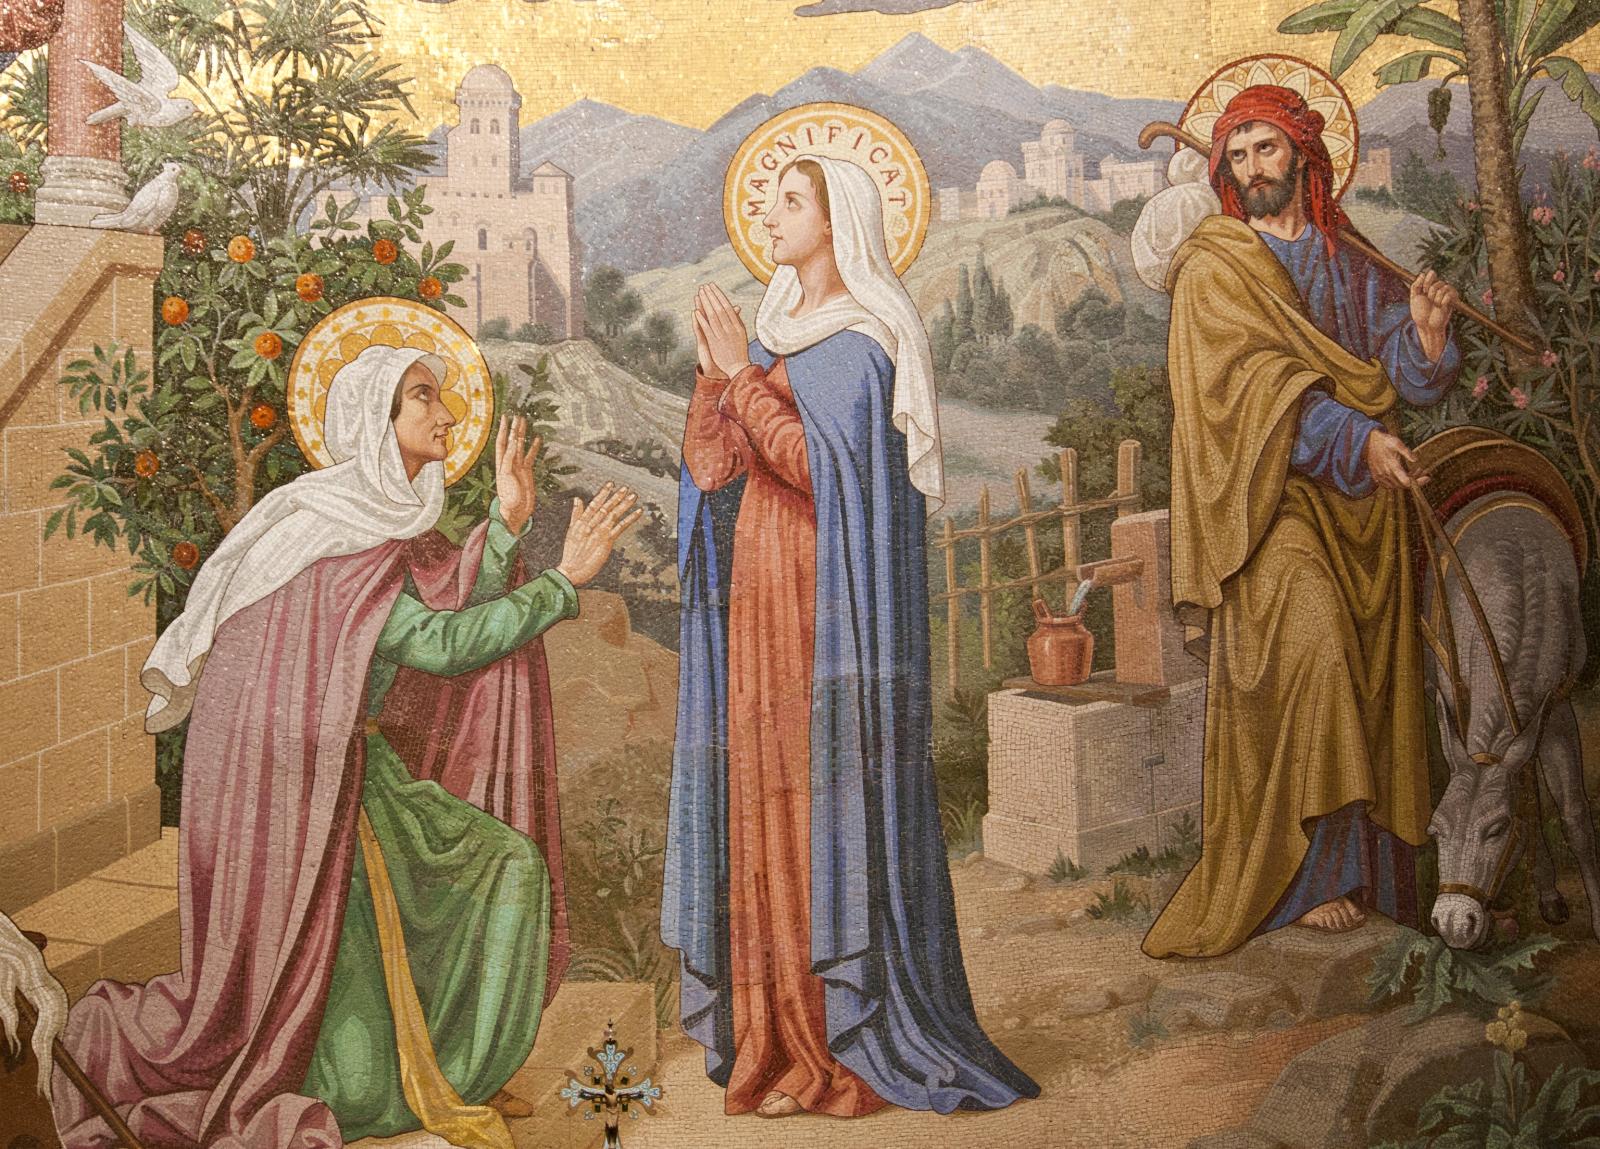 The Visitation - the joys of service & new life